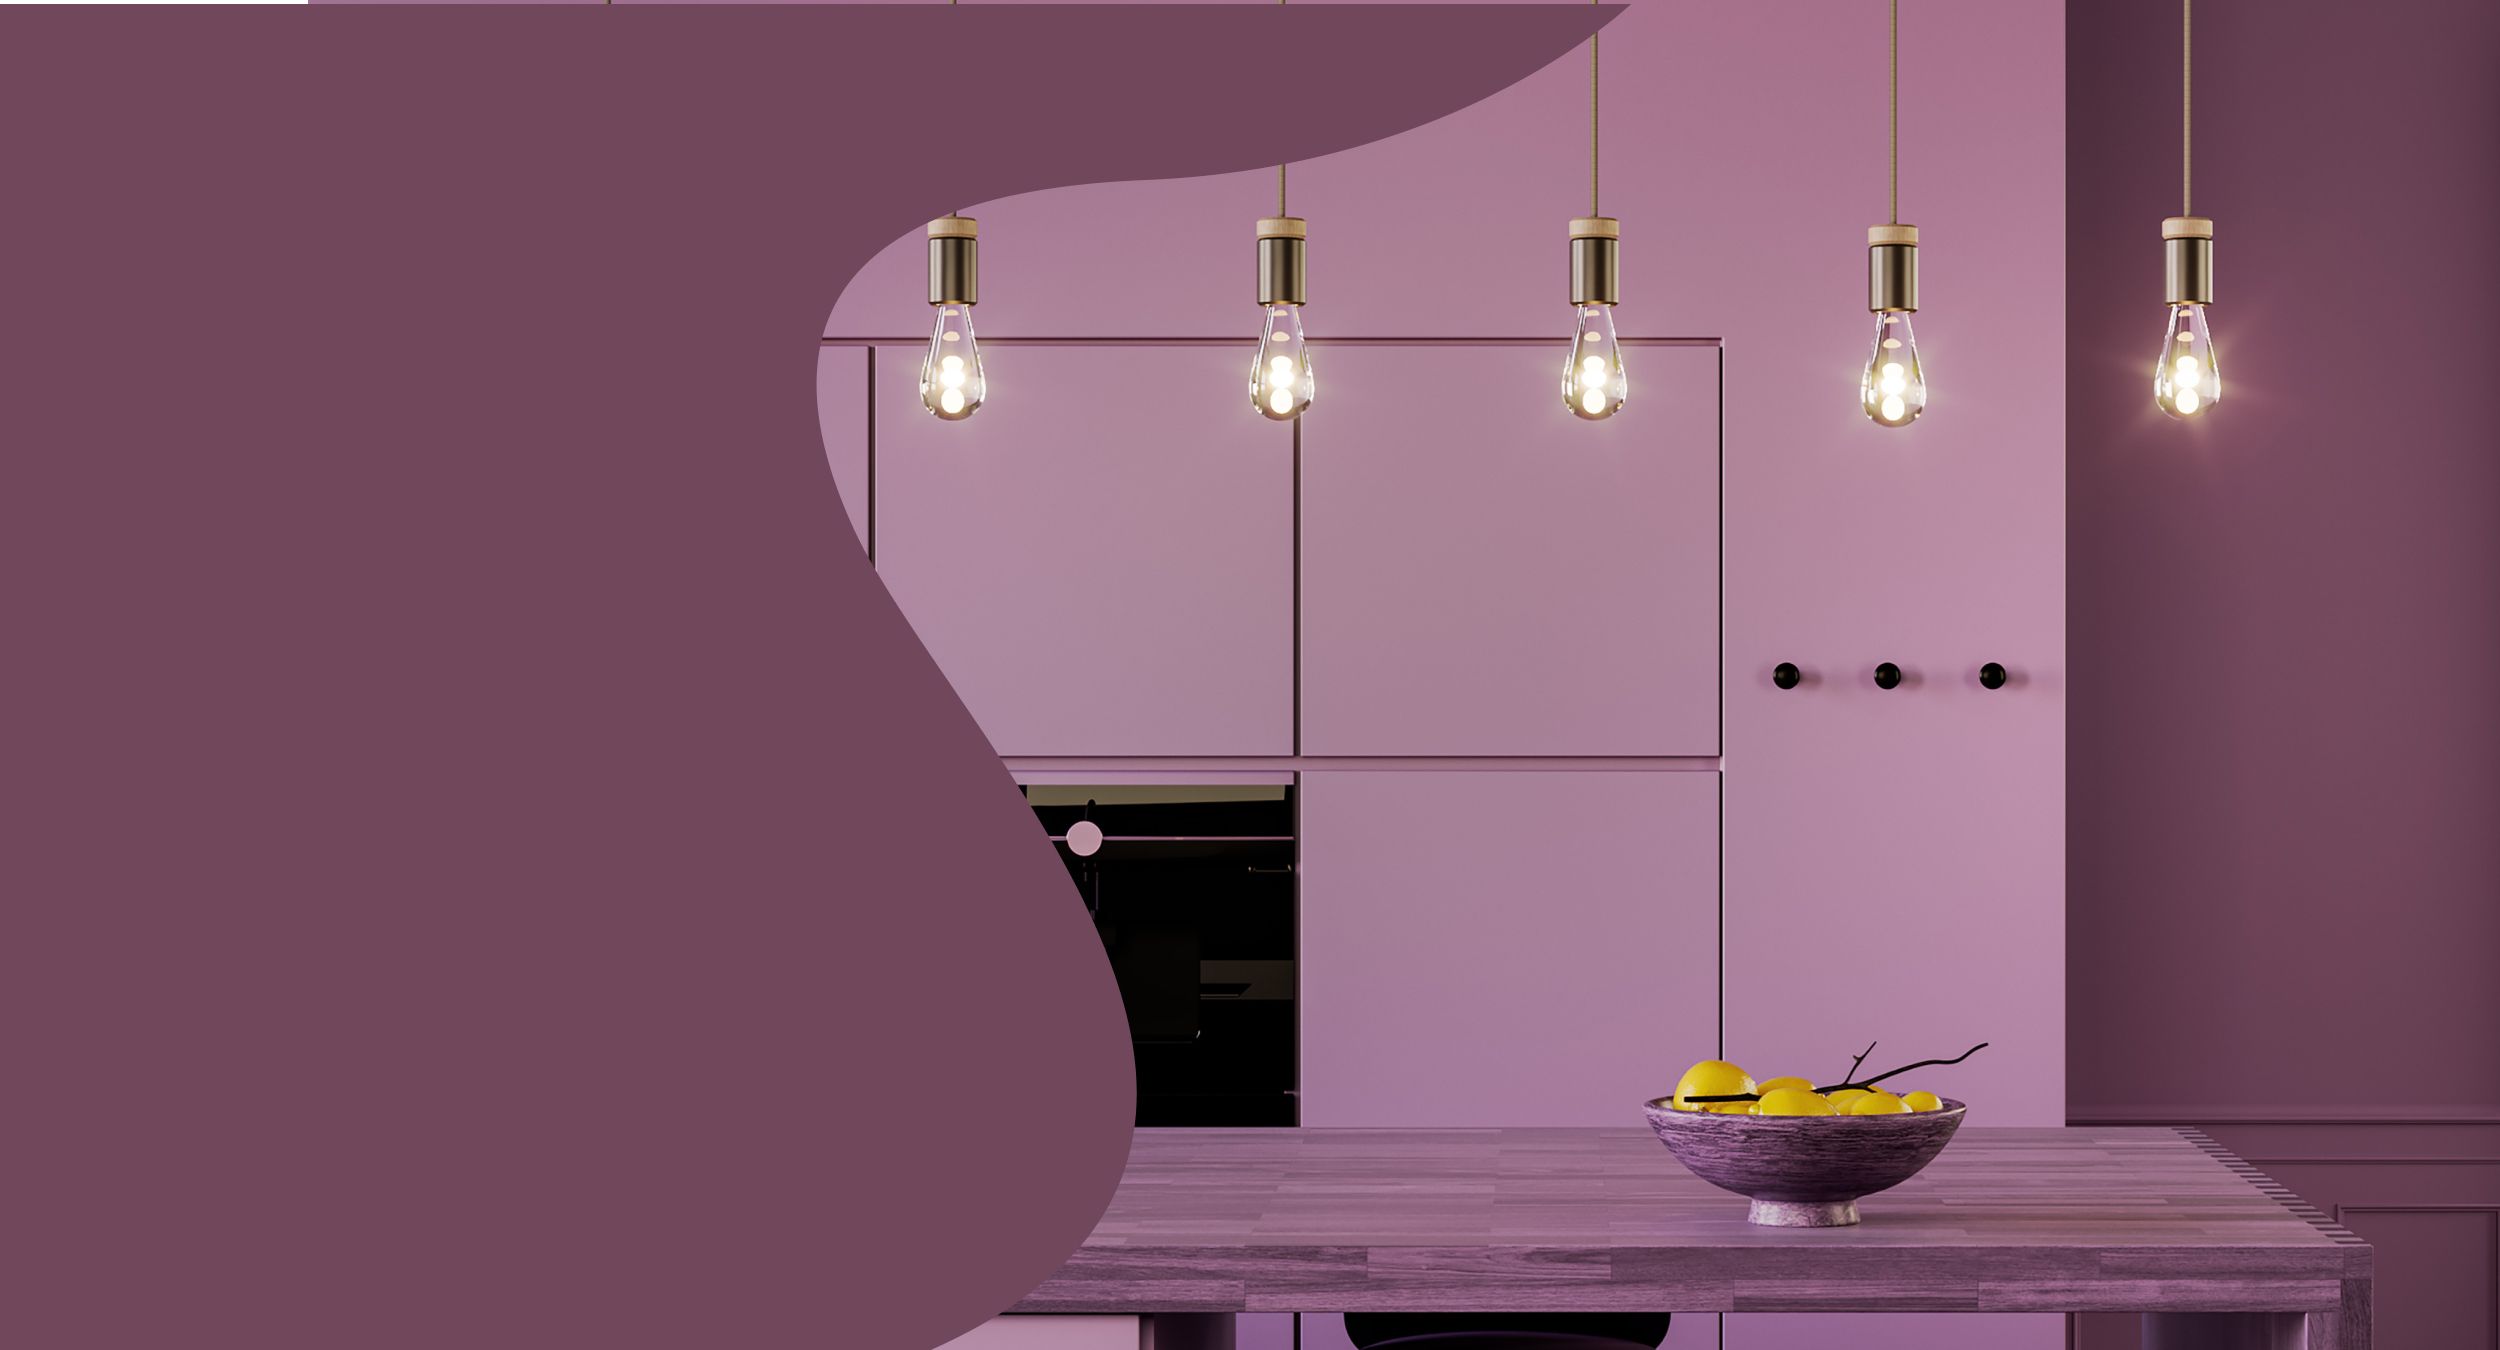 Suspension lamps over a kitchen island